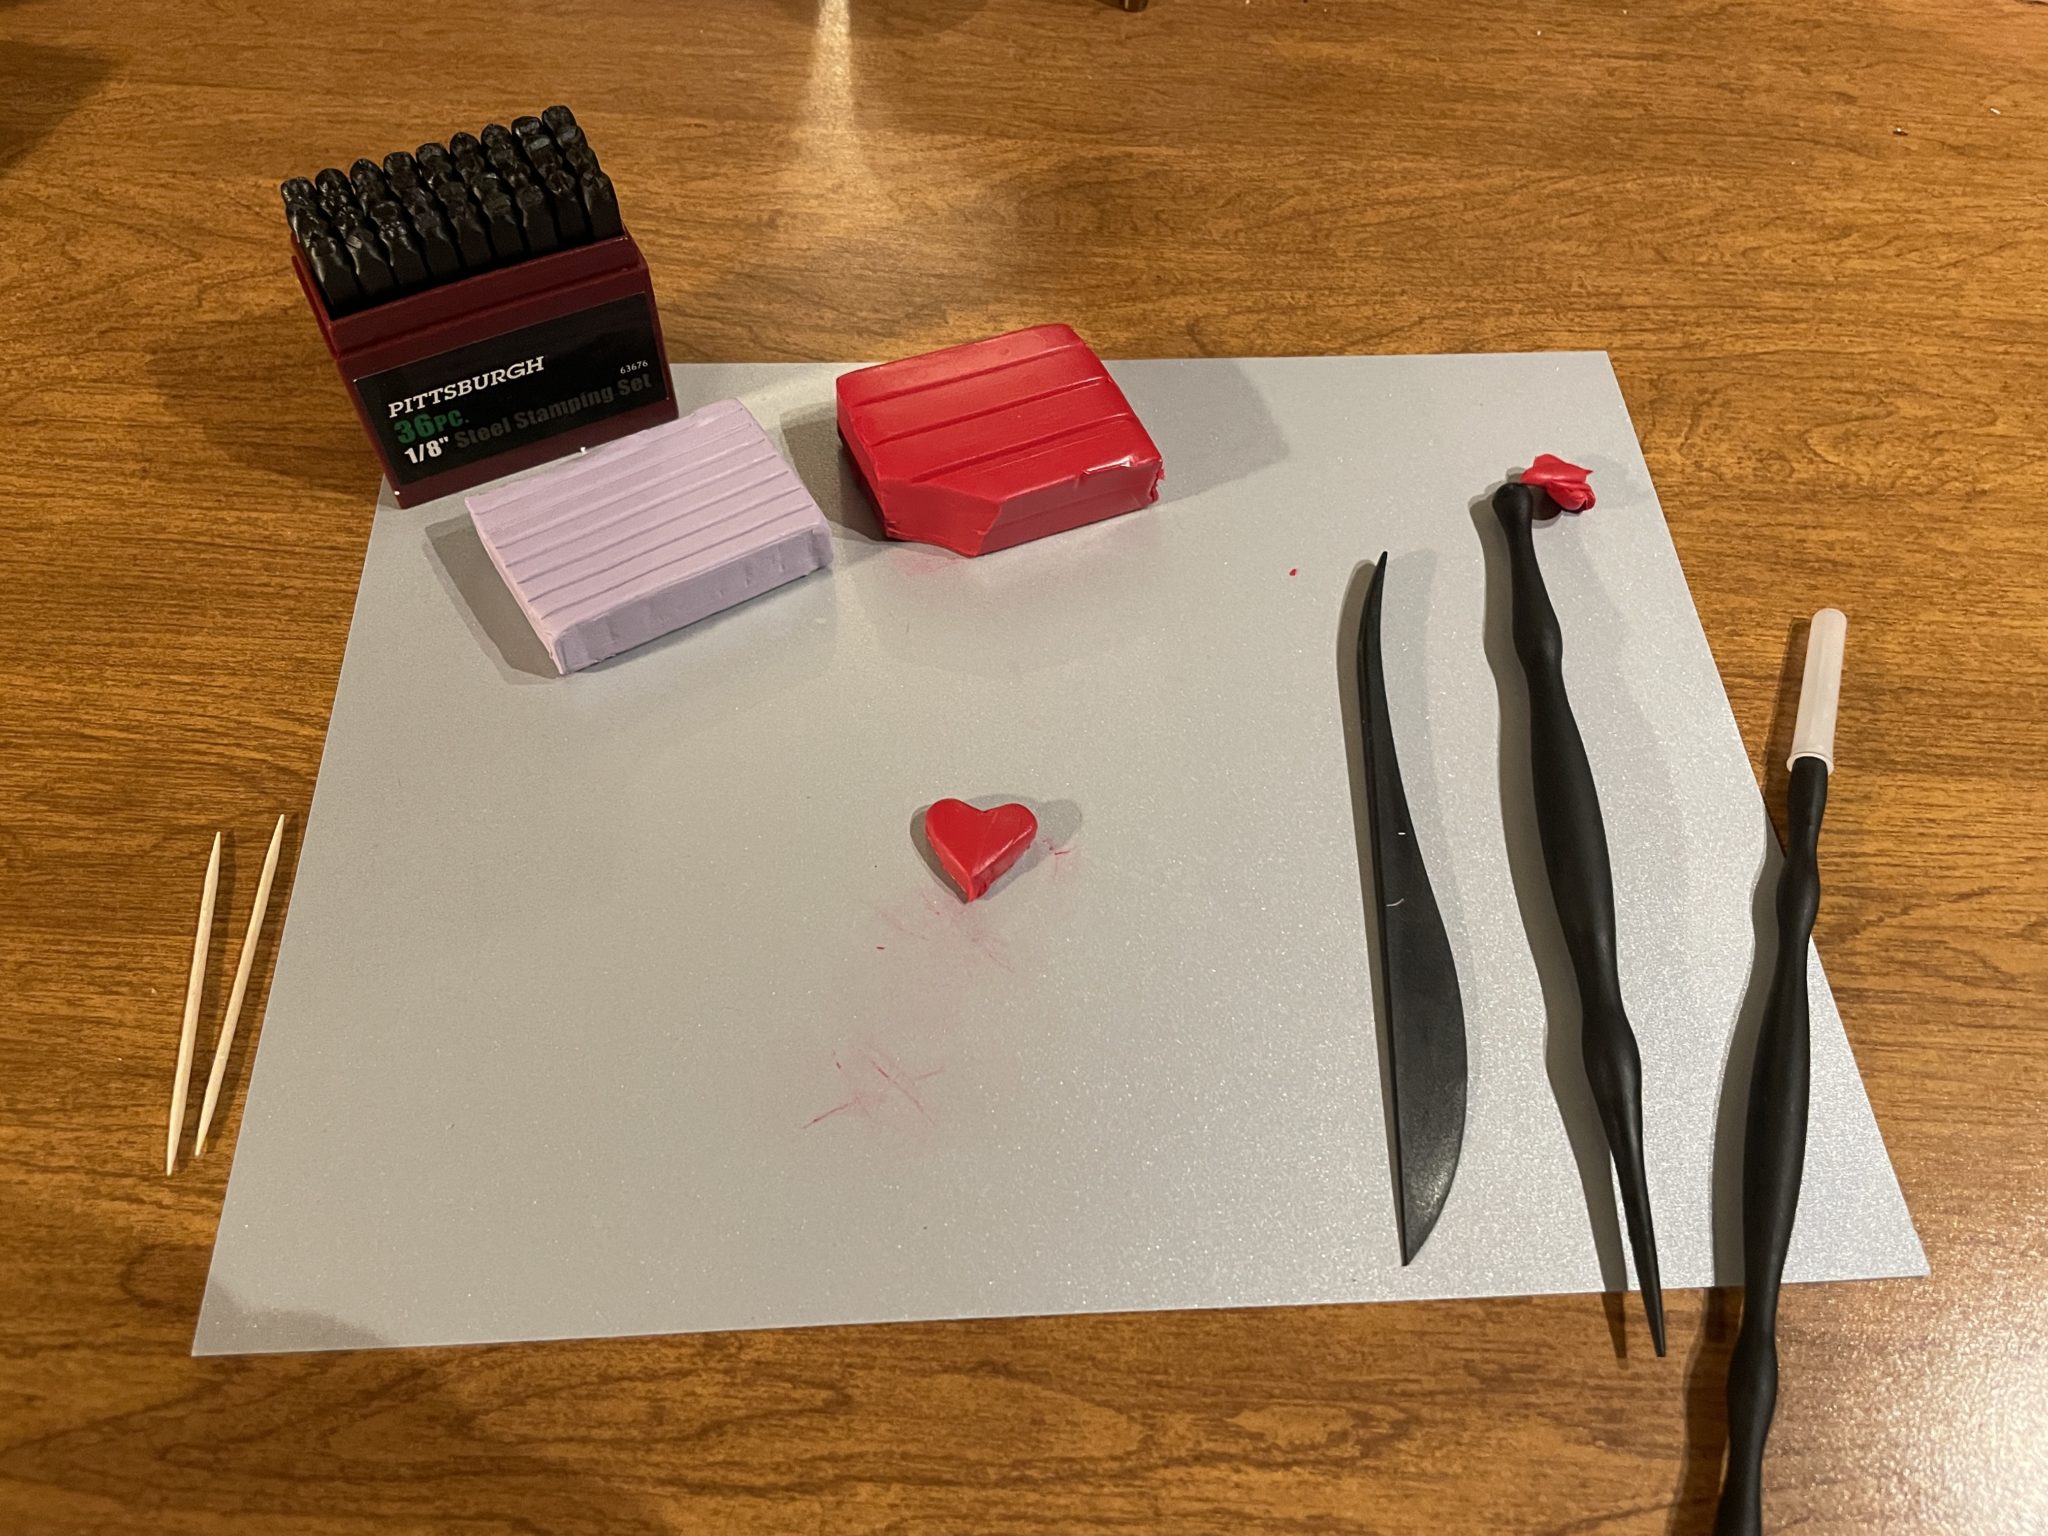 Photo of materials needed to make your own clay conversation heart. The small red clay ball has been shaped into a heart and placed in the center of the silver construction paper. 